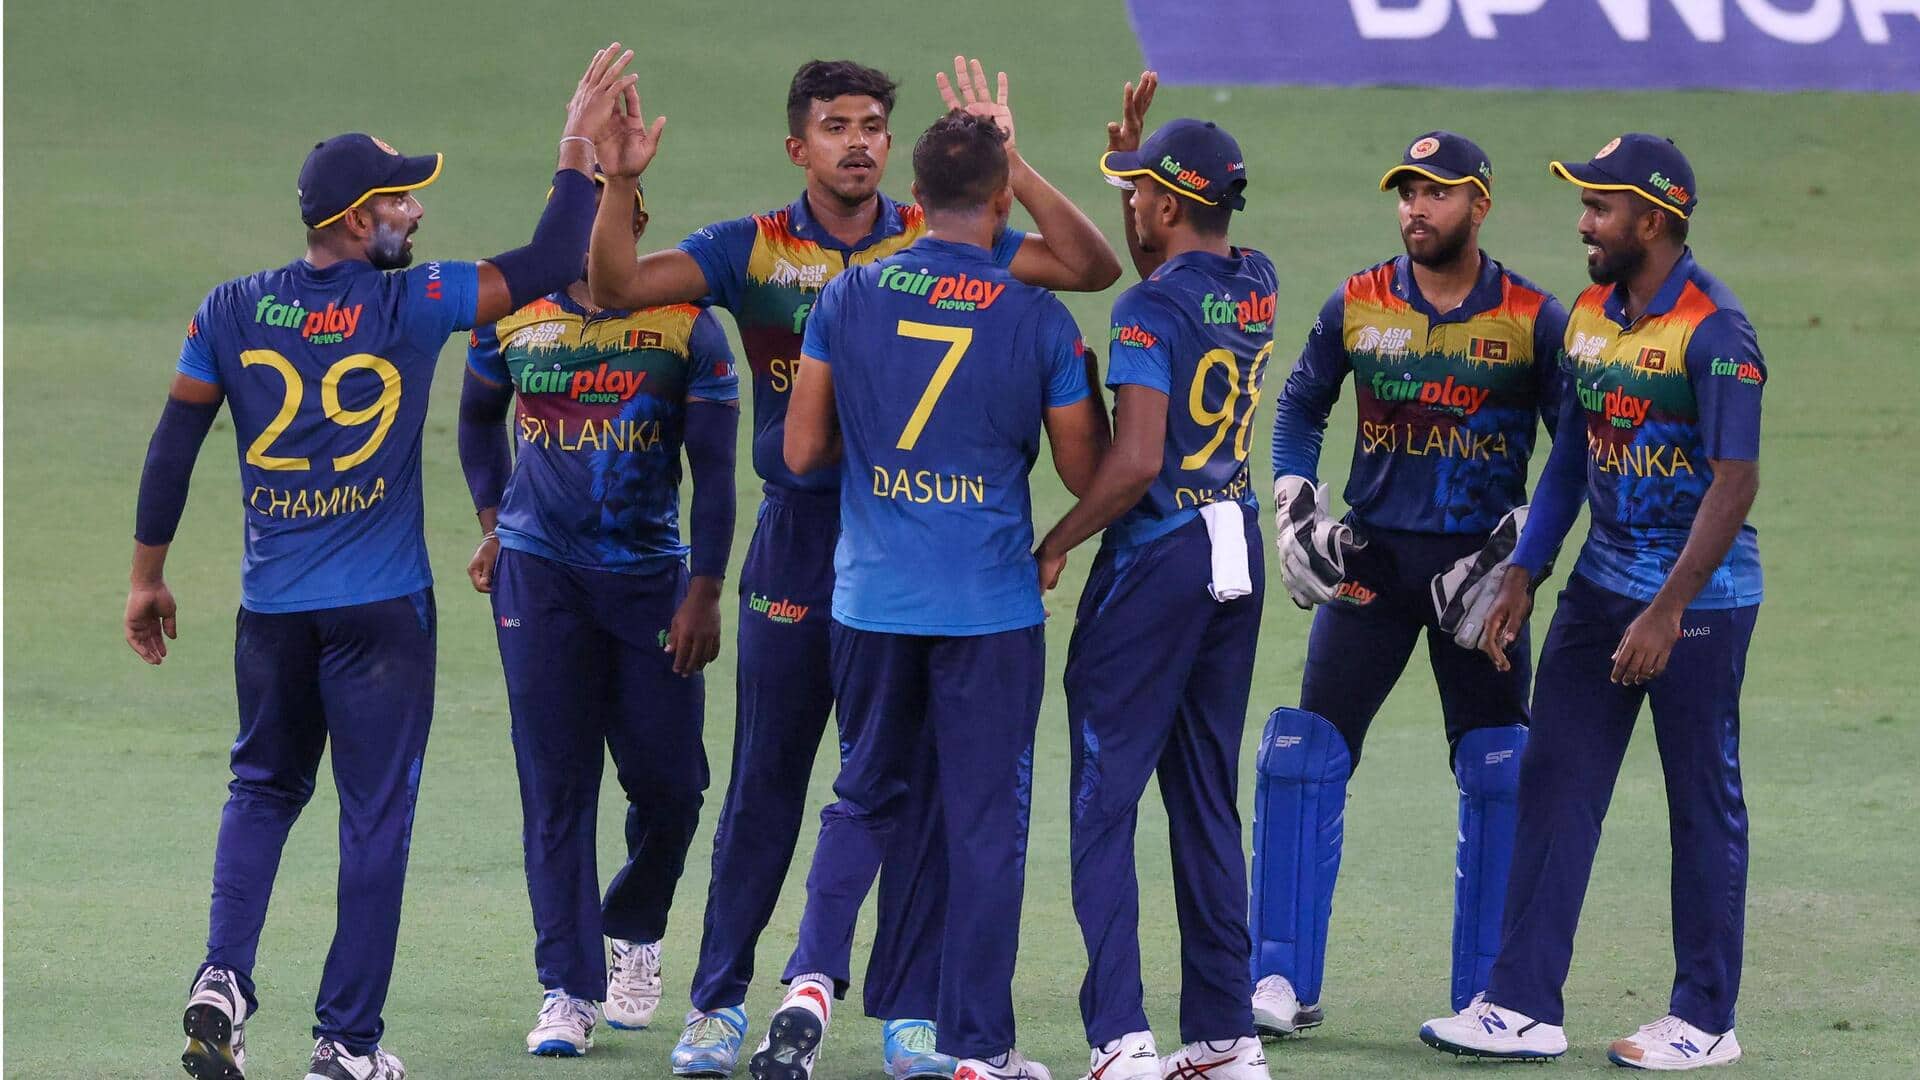 ICC lifts Sri Lanka's suspension with immediate effect: Details here